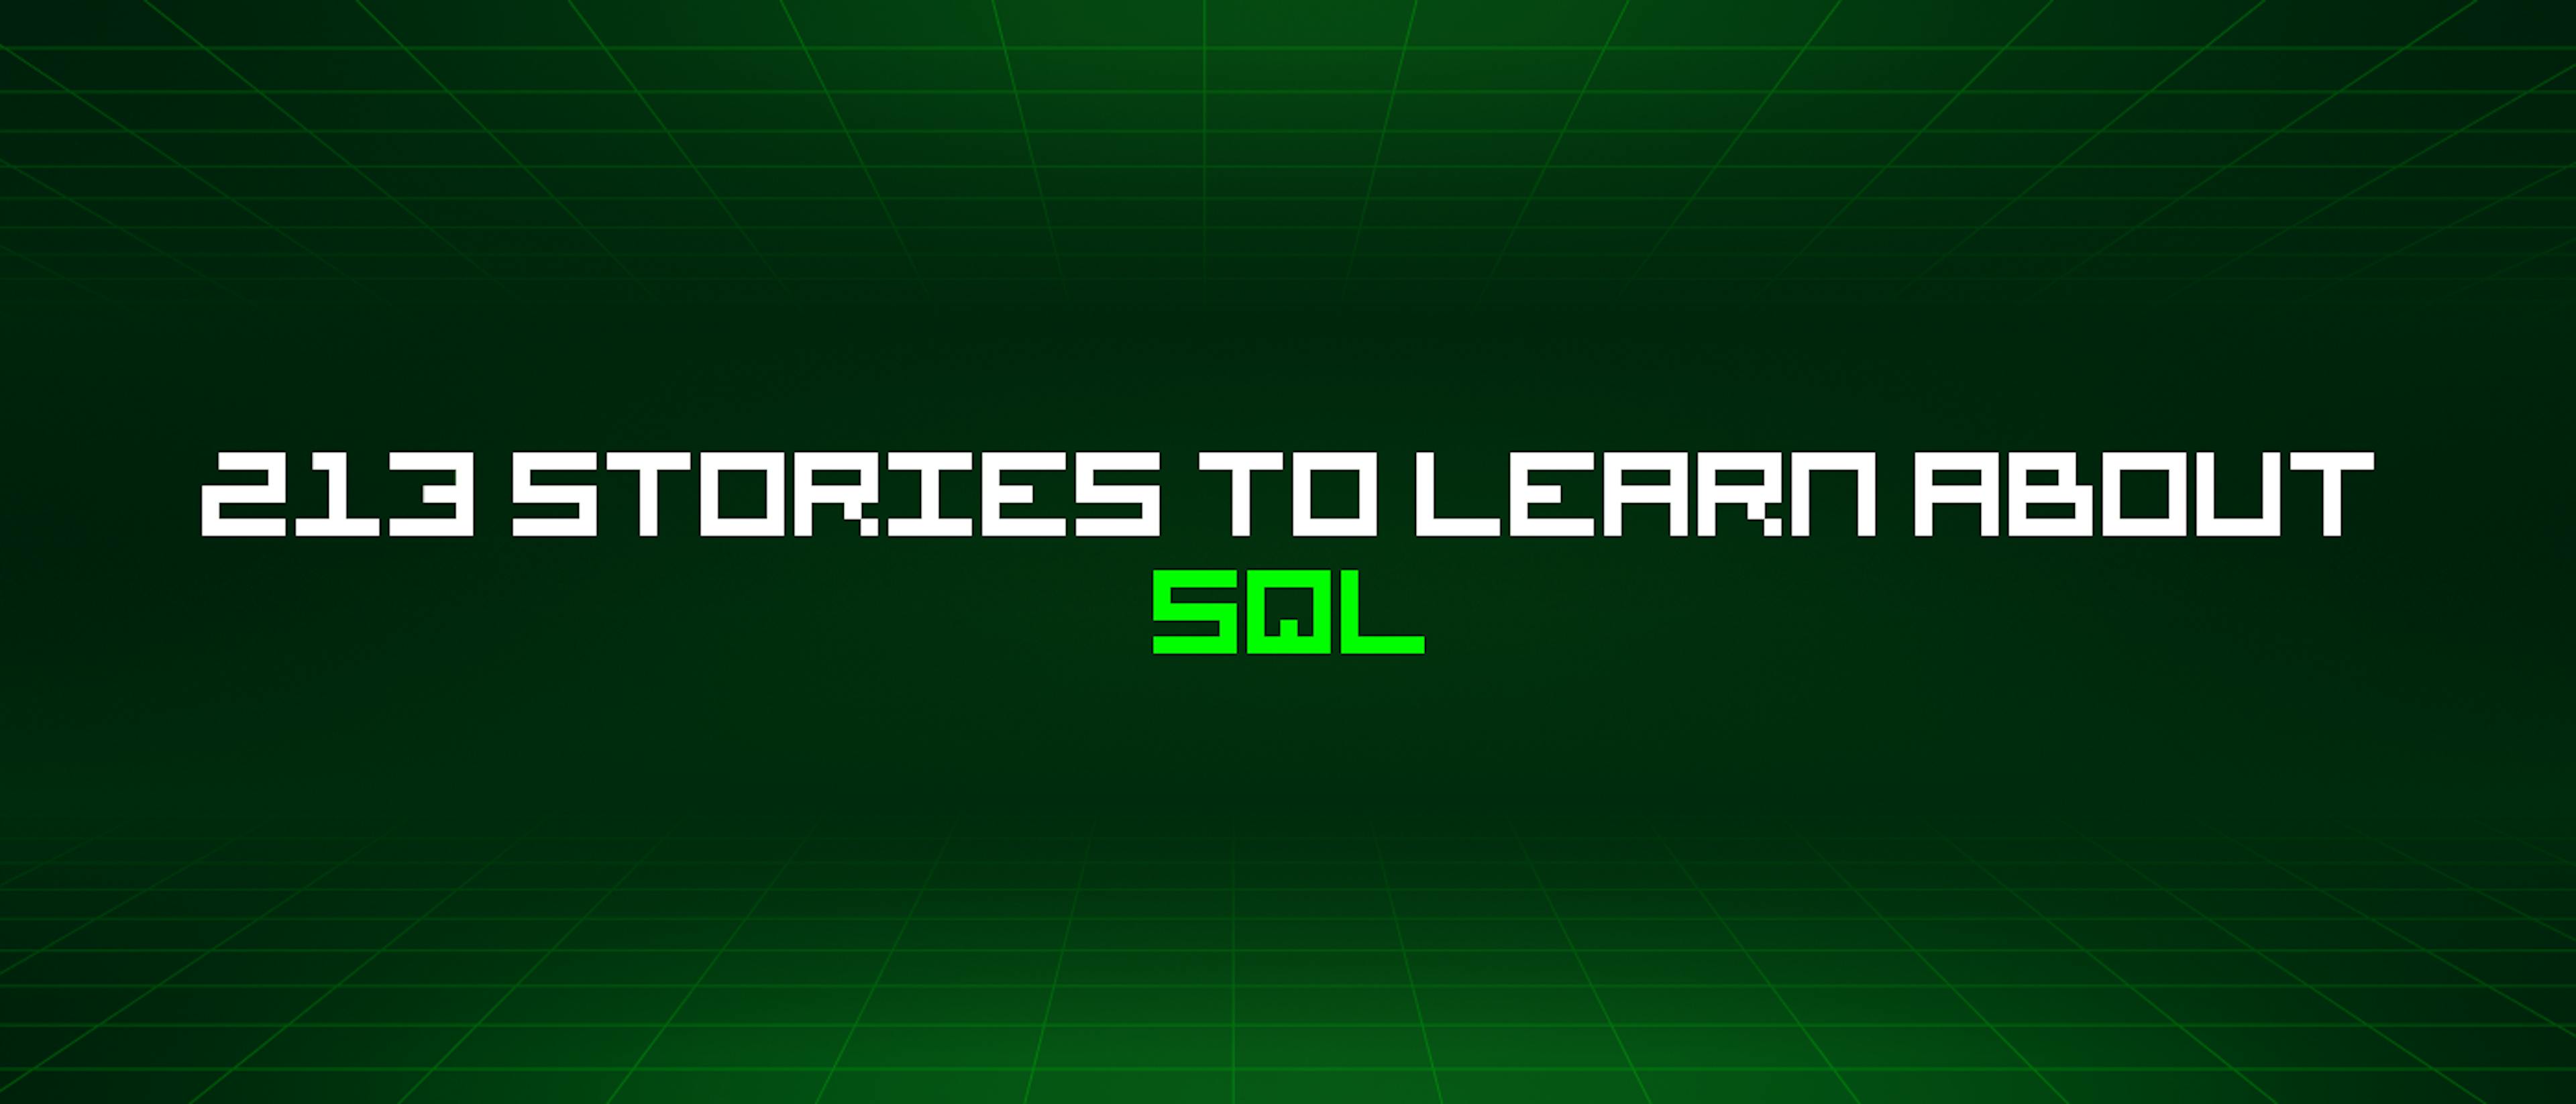 featured image - 213 Stories To Learn About Sql